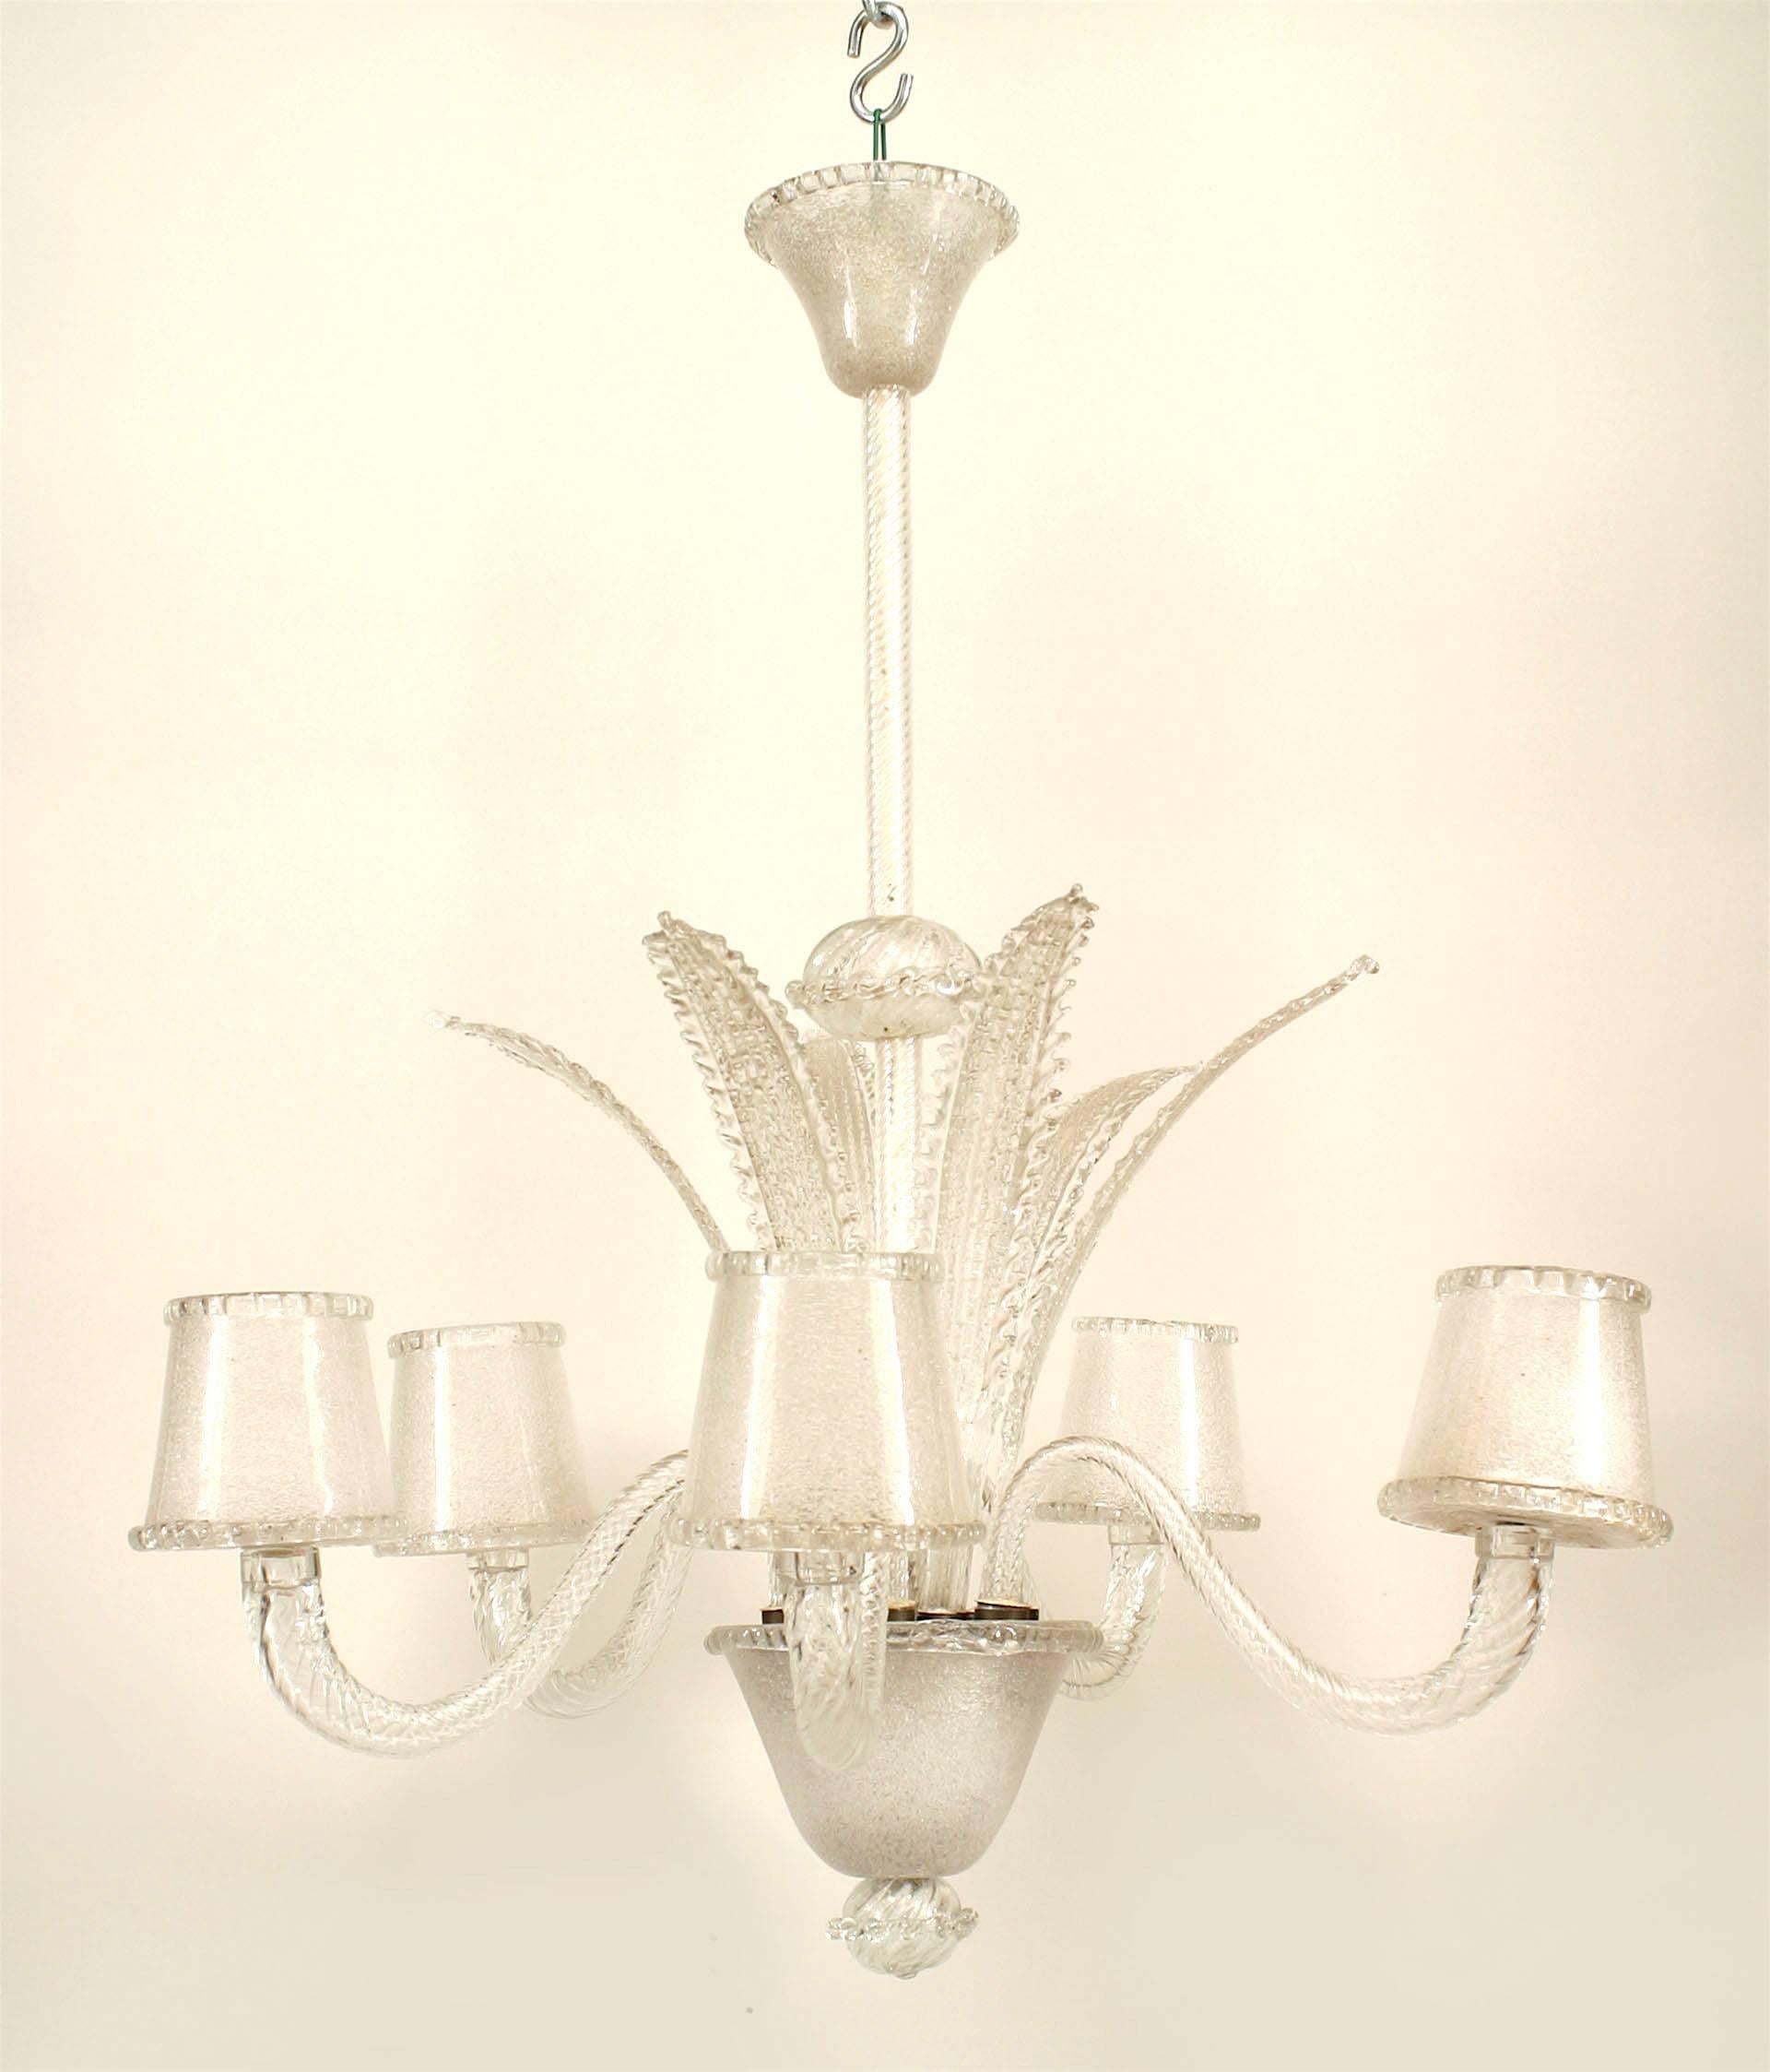 Italian (1940s) Murano clear glass chandelier with 5 scroll and swirl glass design arms supporting light shades with 5 centered feathers and a finial bottom.
